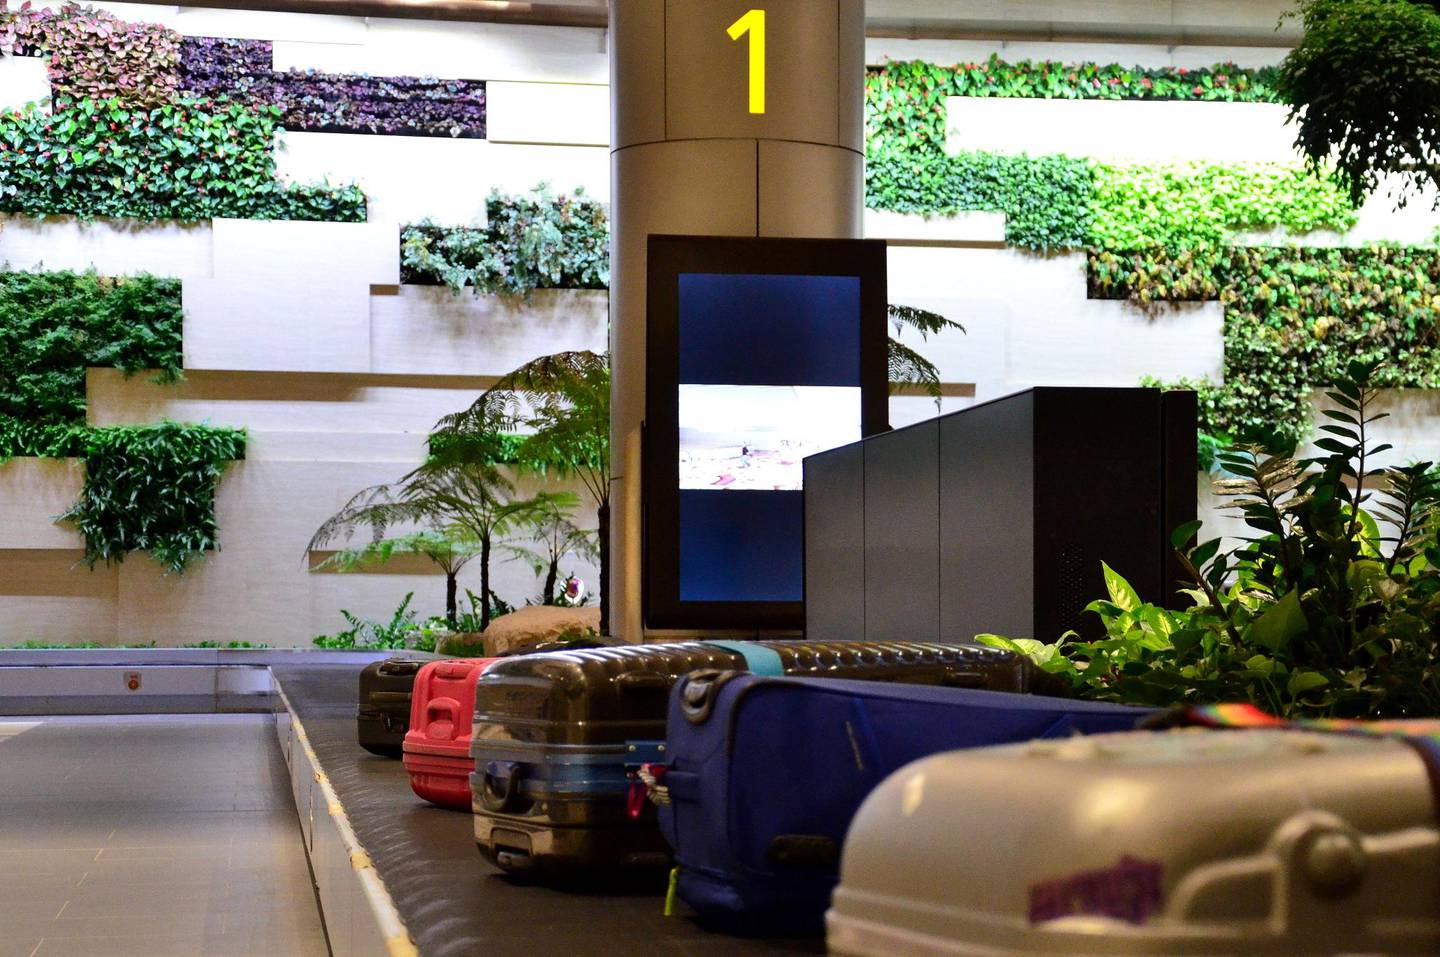 Travellers flying on a codeshare can book all their travel on one ticket and will only need to collect baggage at their final destination. Photo: Changi Airport Group